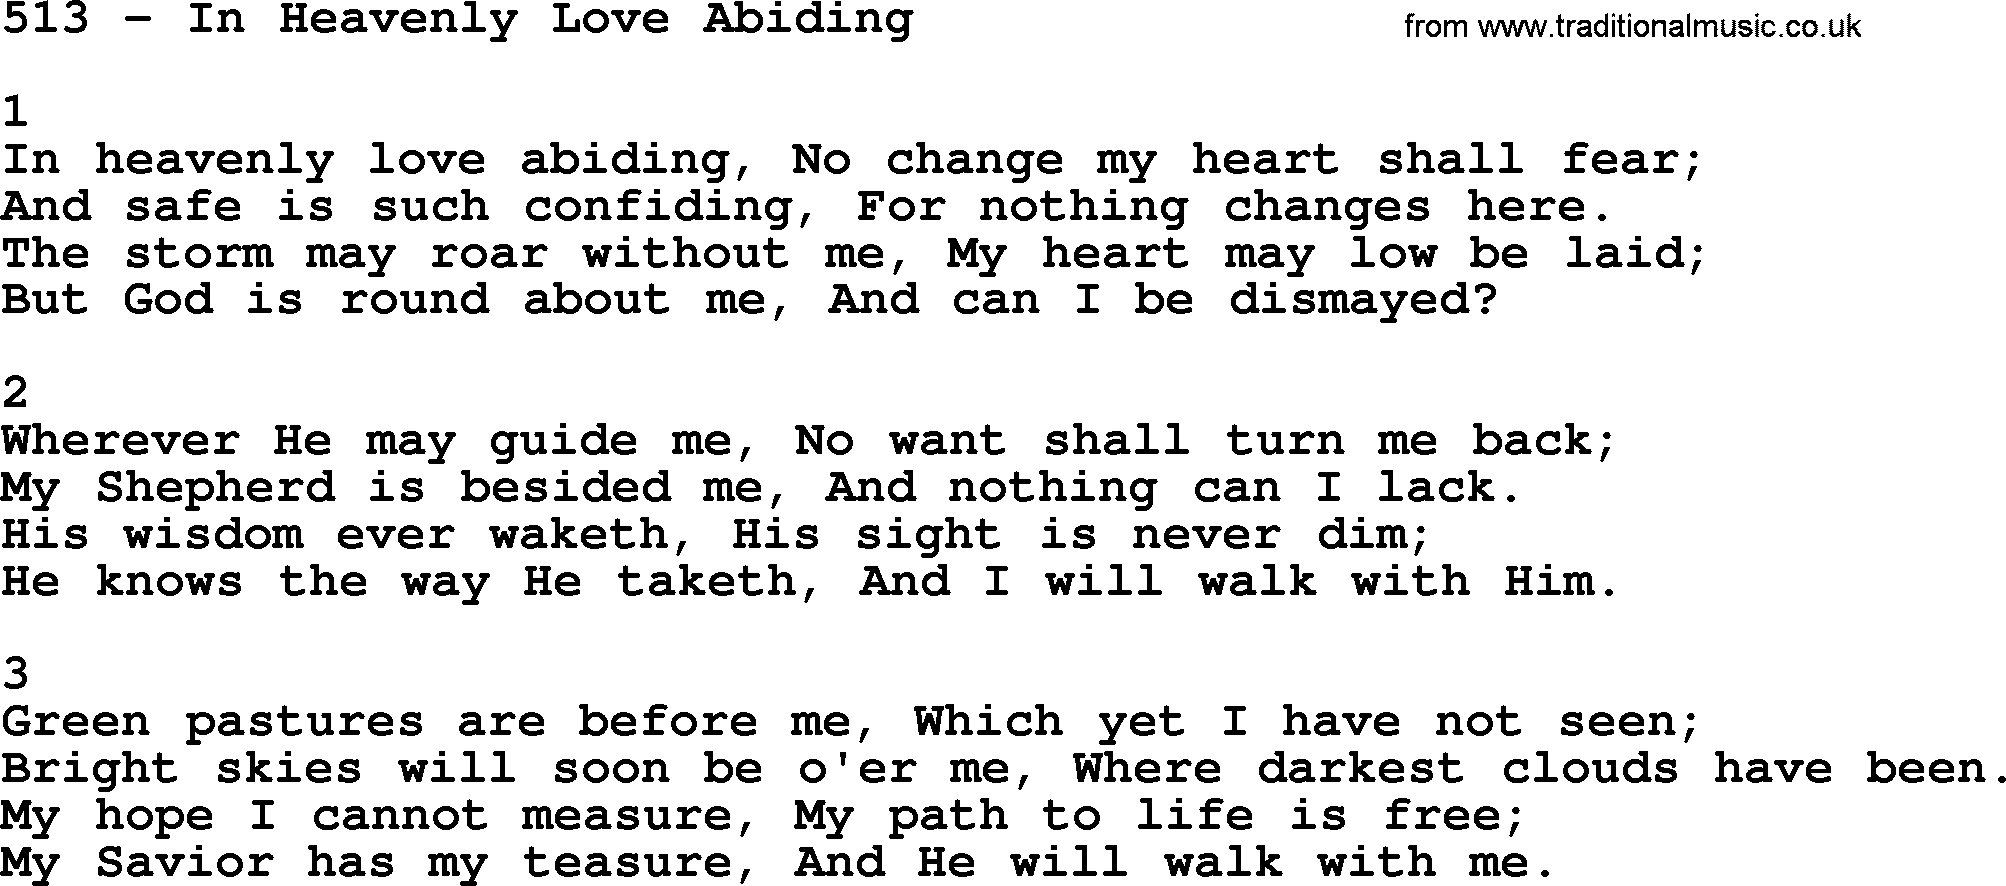 Complete Adventis Hymnal, title: 513-In Heavenly Love Abiding, with lyrics, midi, mp3, powerpoints(PPT) and PDF,